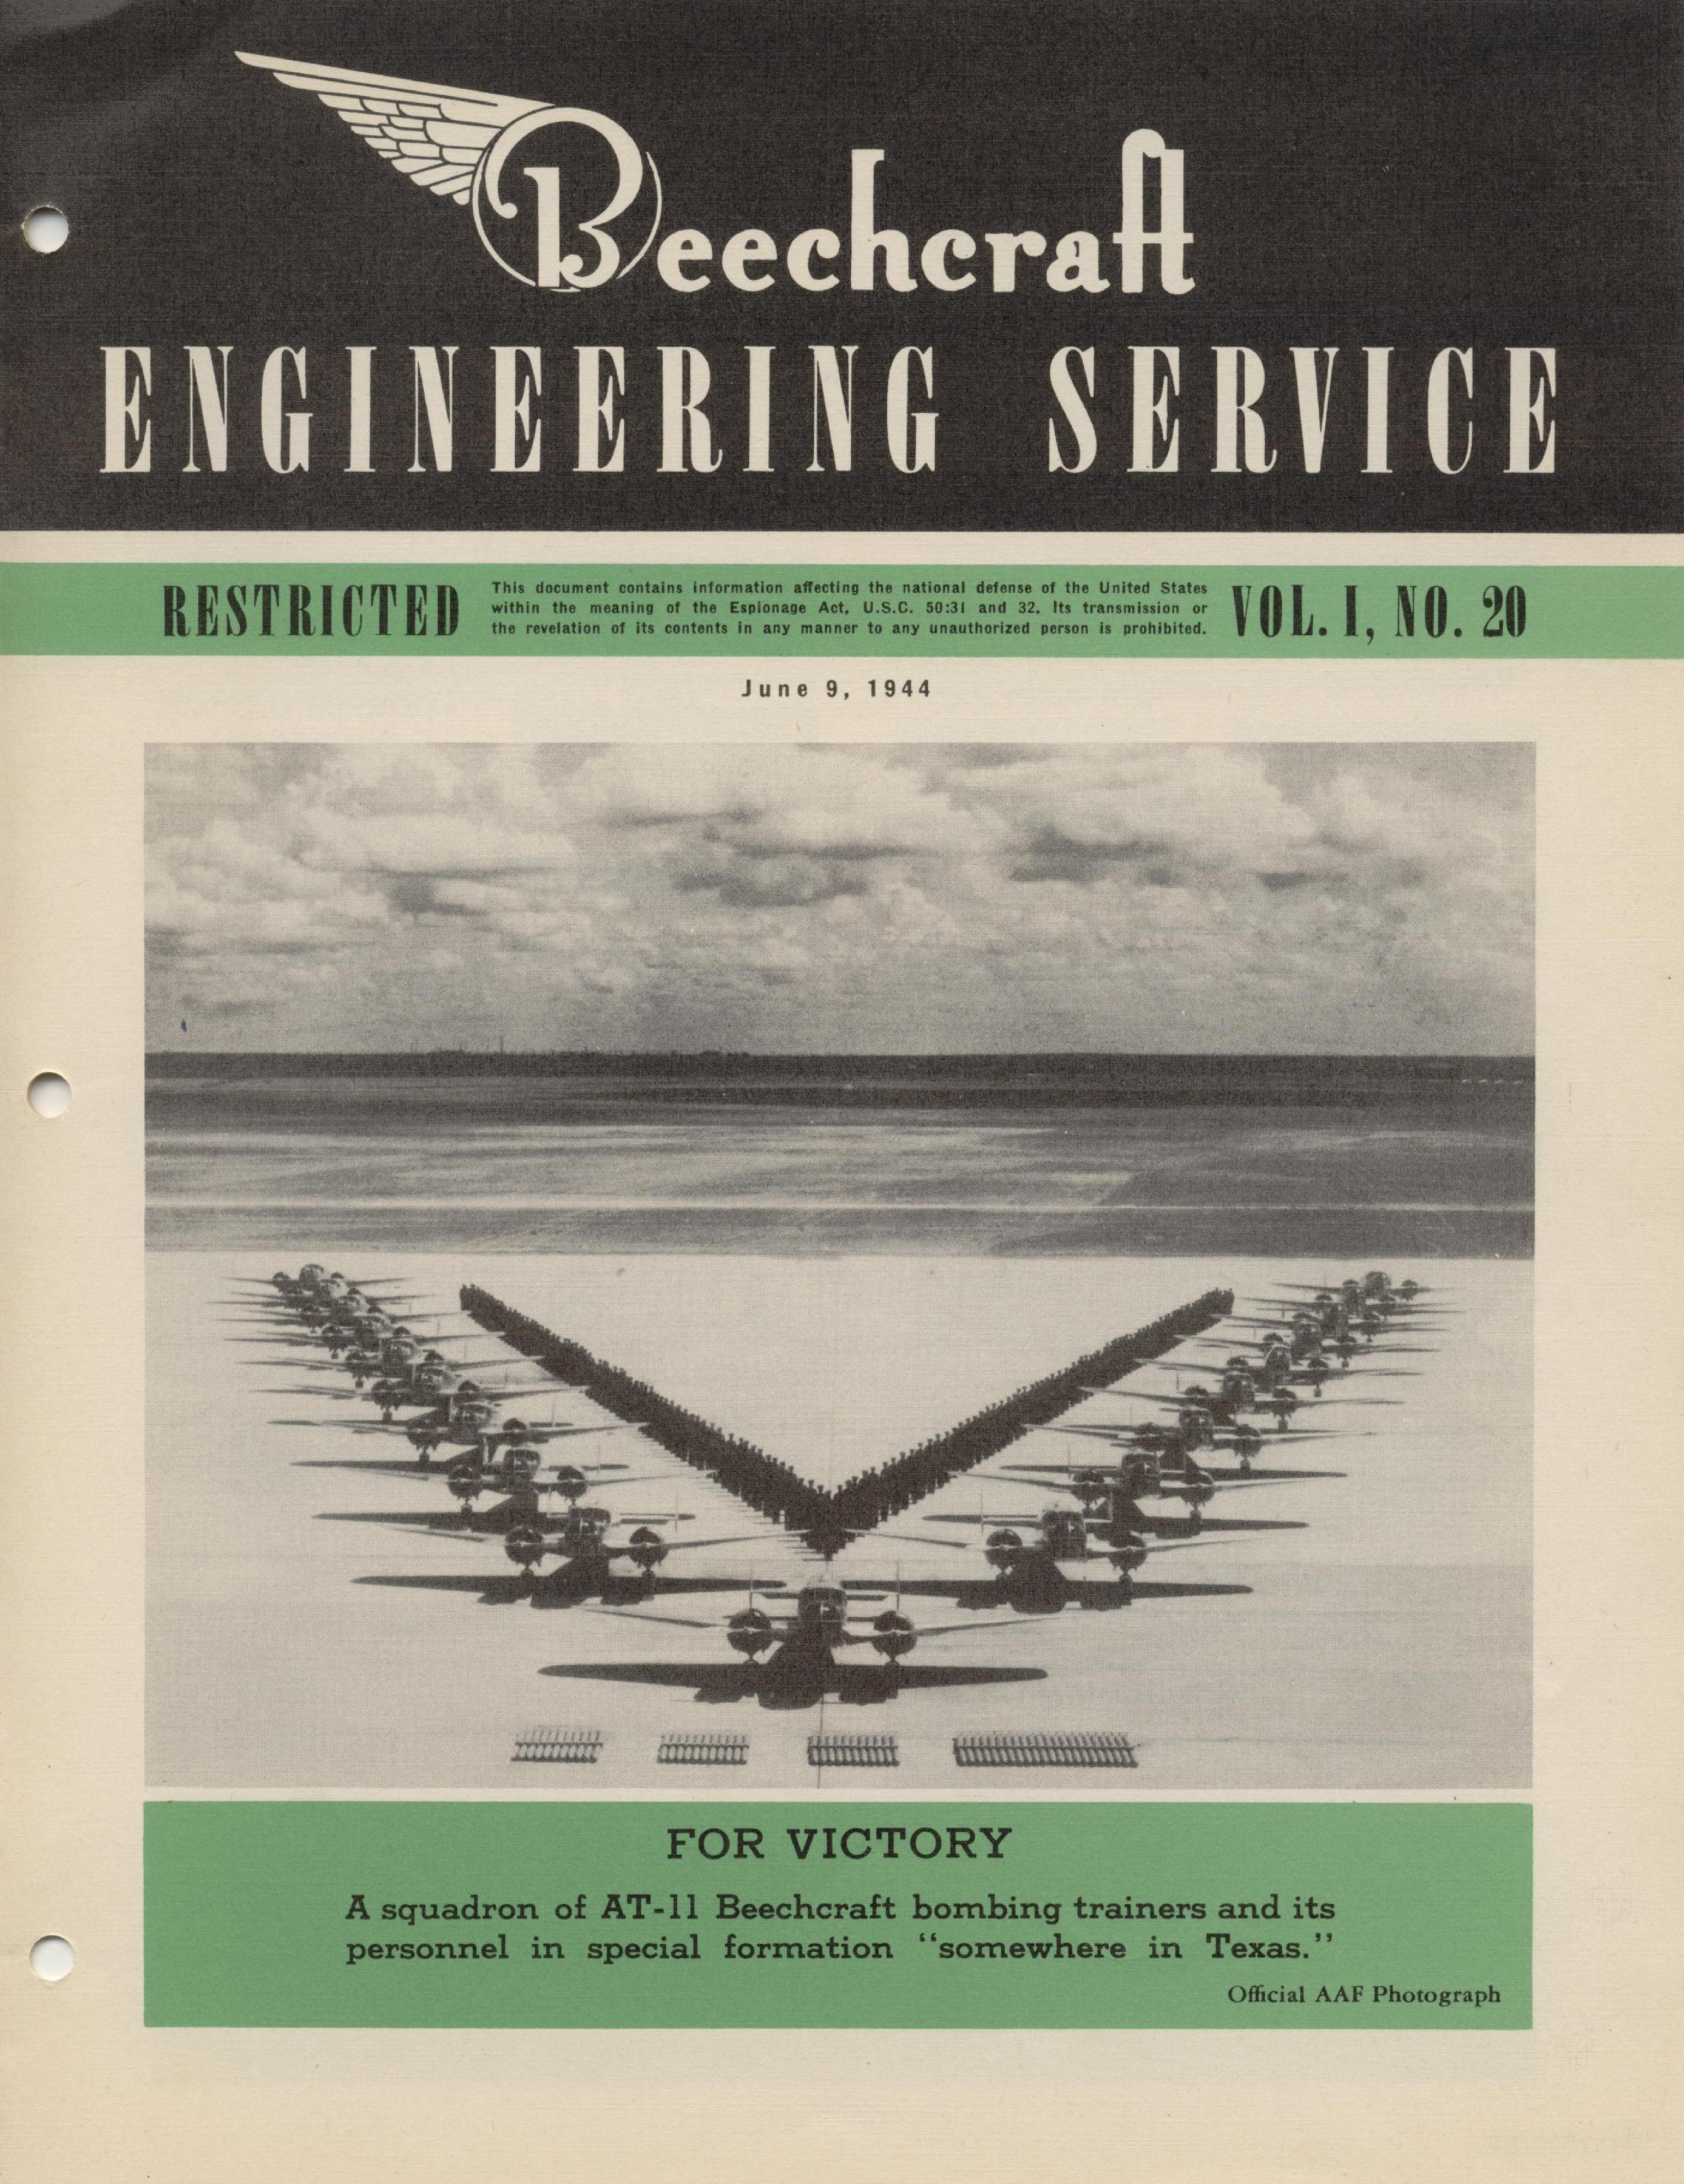 Sample page 1 from AirCorps Library document: Vol. I, No. 20 - Beechcraft Engineering Service